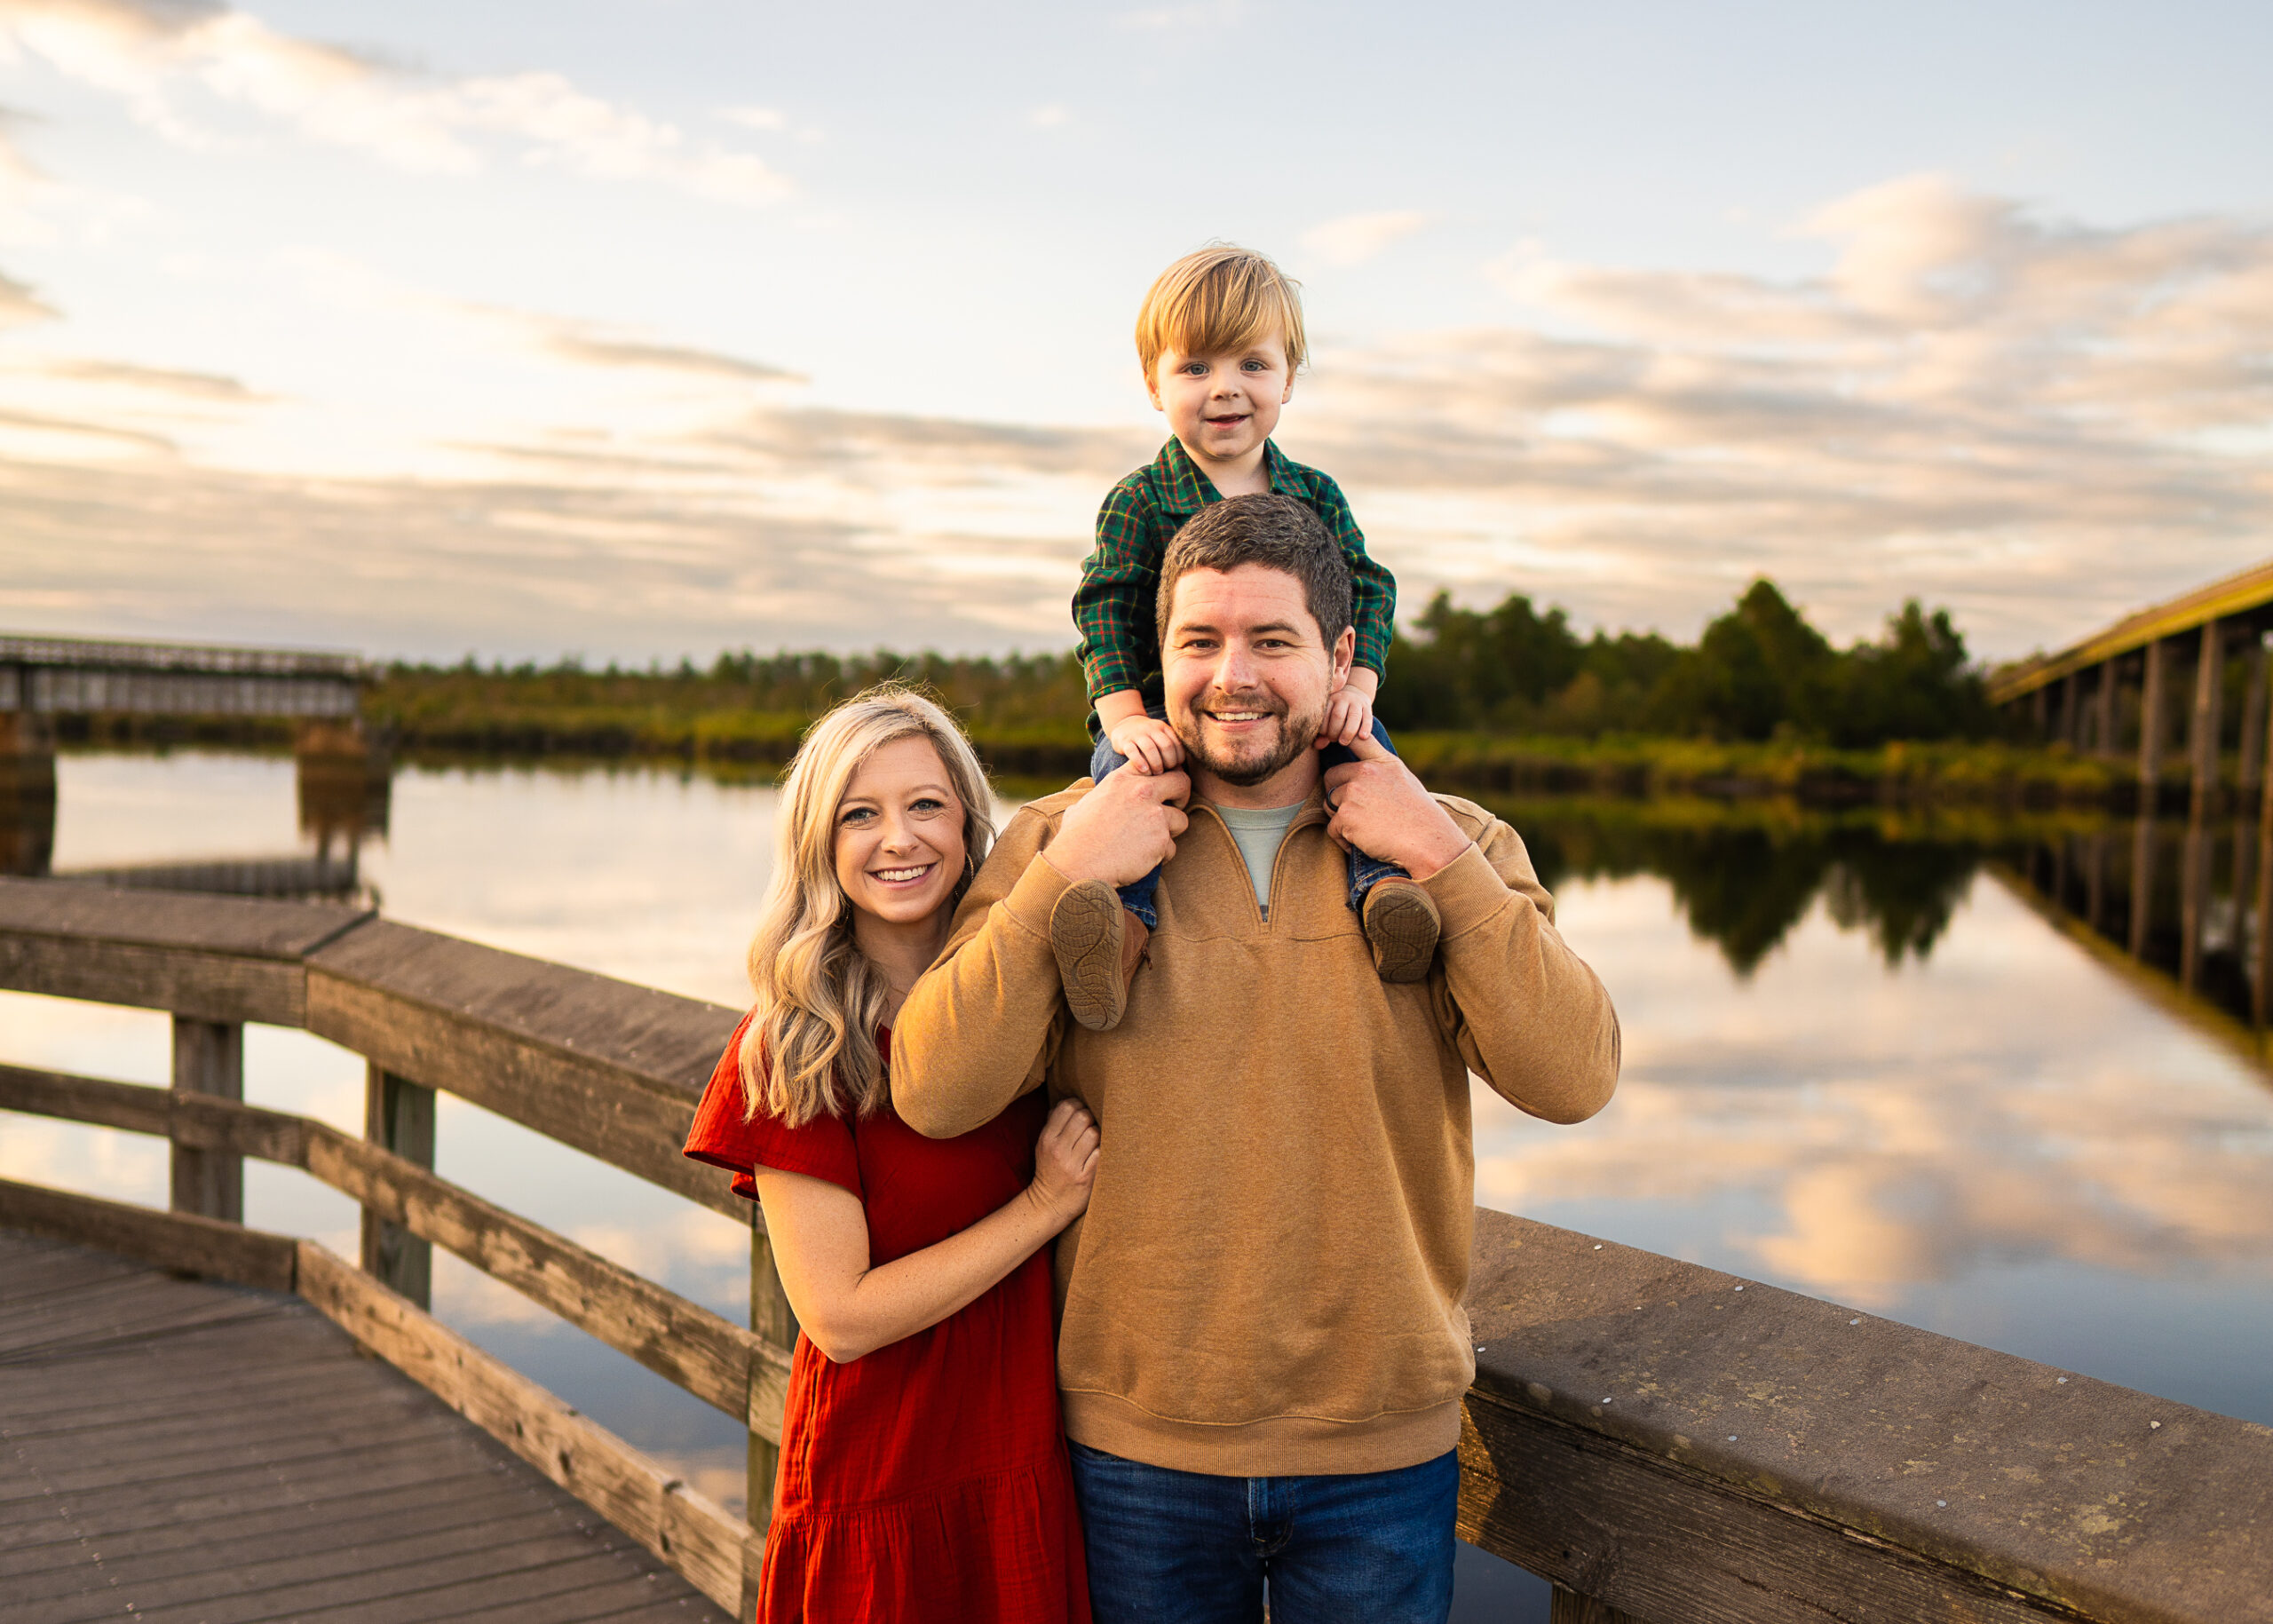 Inside reasons from a family photographer why the Woodbine Riverwalk is the perfect location for a family session